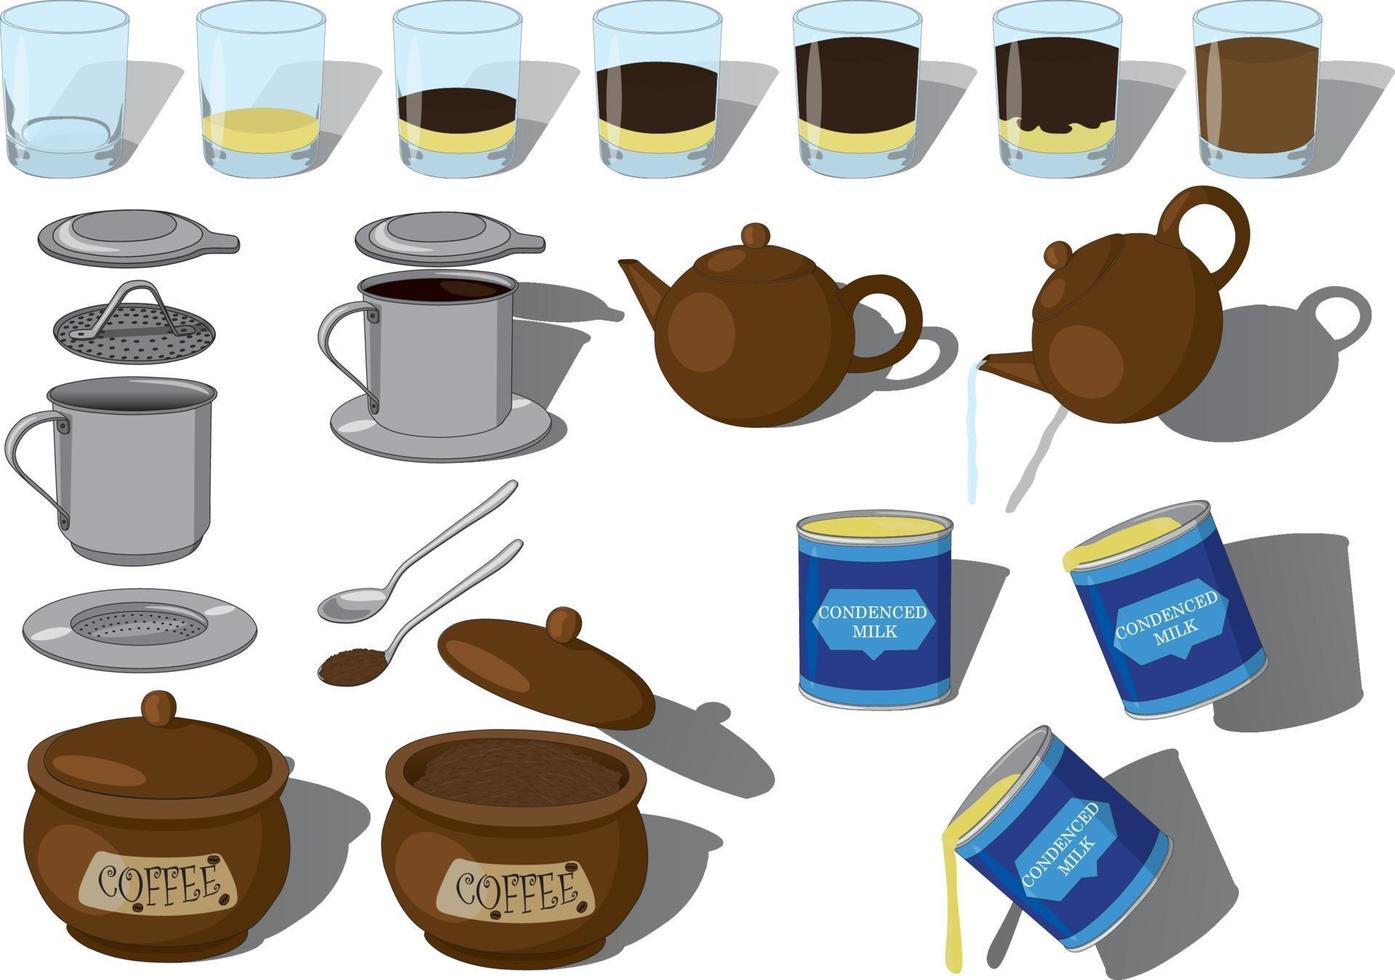 Vietnamese phin coffee step-by-step making vector illustration